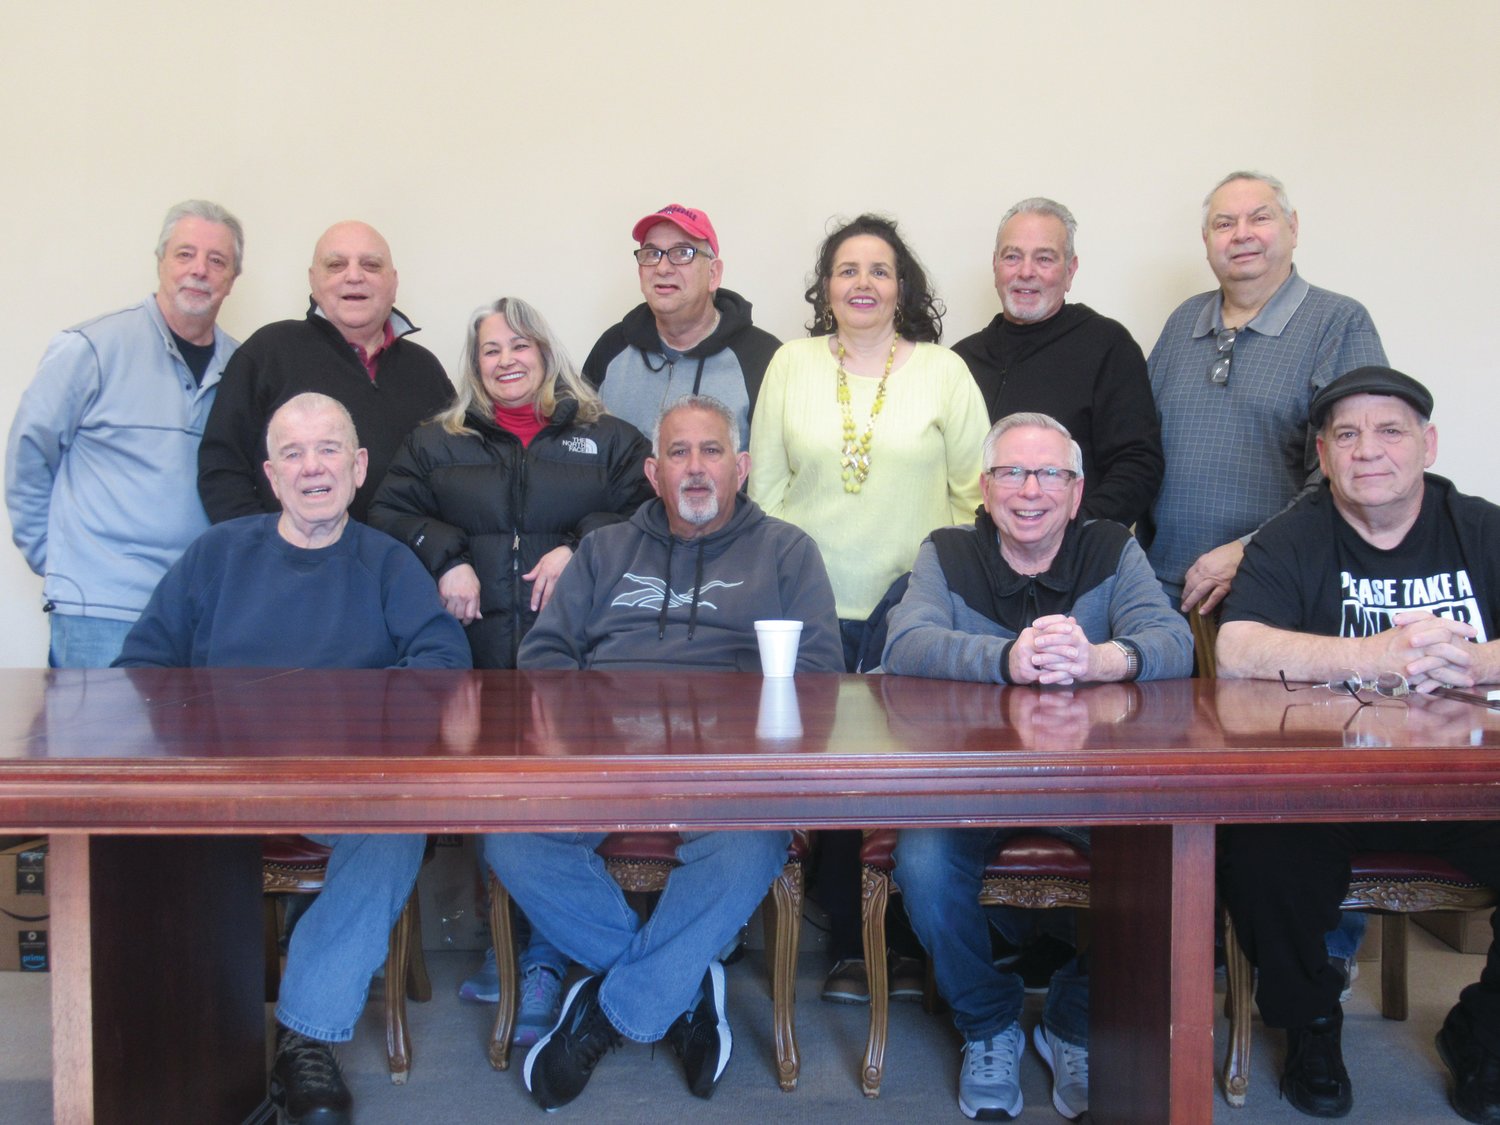 HELPING HANDS: These are the volunteers who helped make up 60 rescue kits containing 19 items each for people in need: The group includes Jerry Allore, Lou Massemini, John Riedman. Donald Oliver, Steve Aubee, Bob Picscione, Joe Morenzi, Maria Teotonia, Denise Farias, John D’Errico, Frank DiMaio and Lou Spremulli.